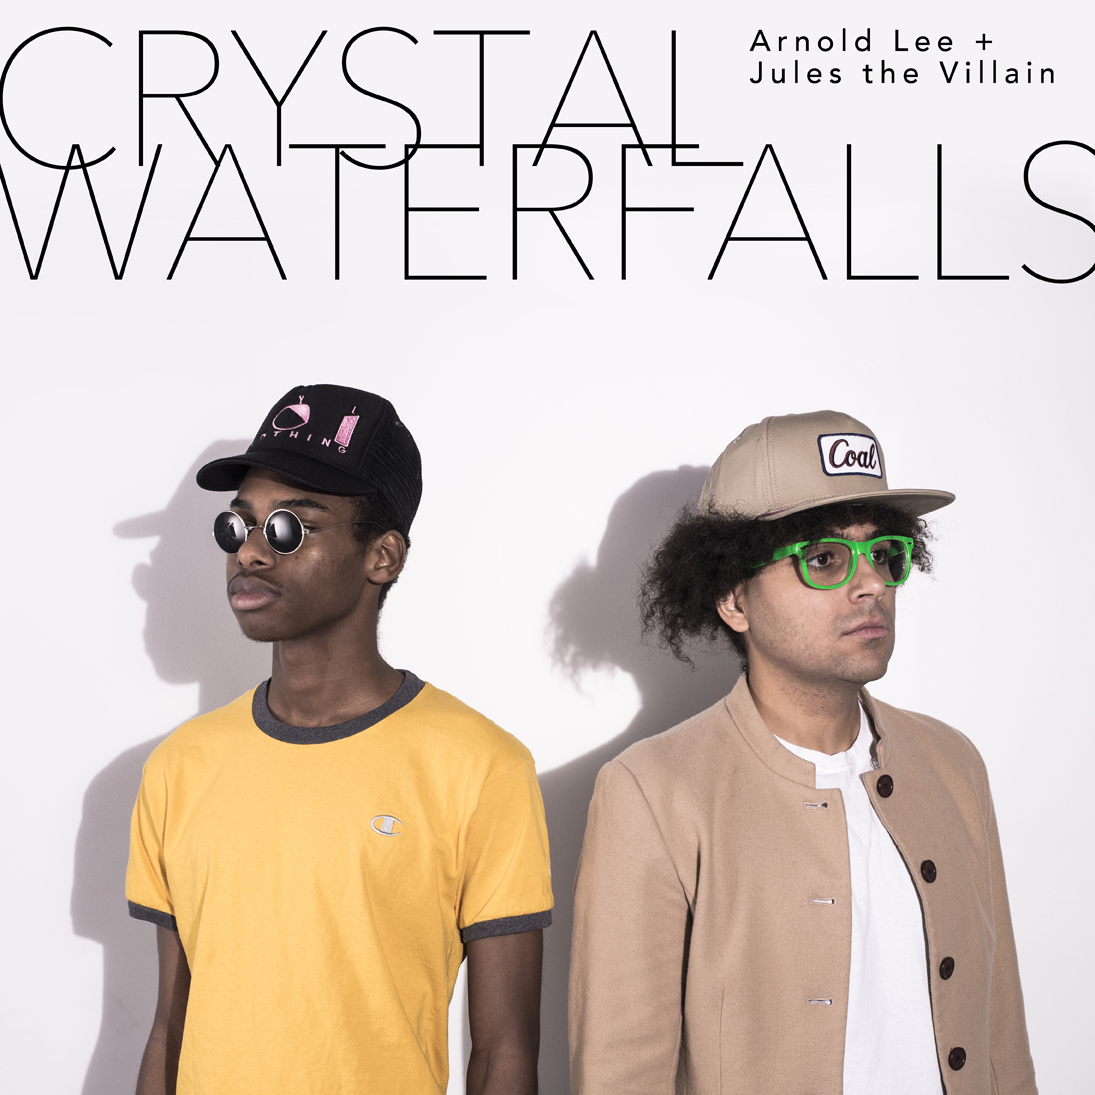 WM | whitehot magazine of contemporary art | MUSIC: Arnold Lee + Jules the  Villain: Crystal Waterfalls